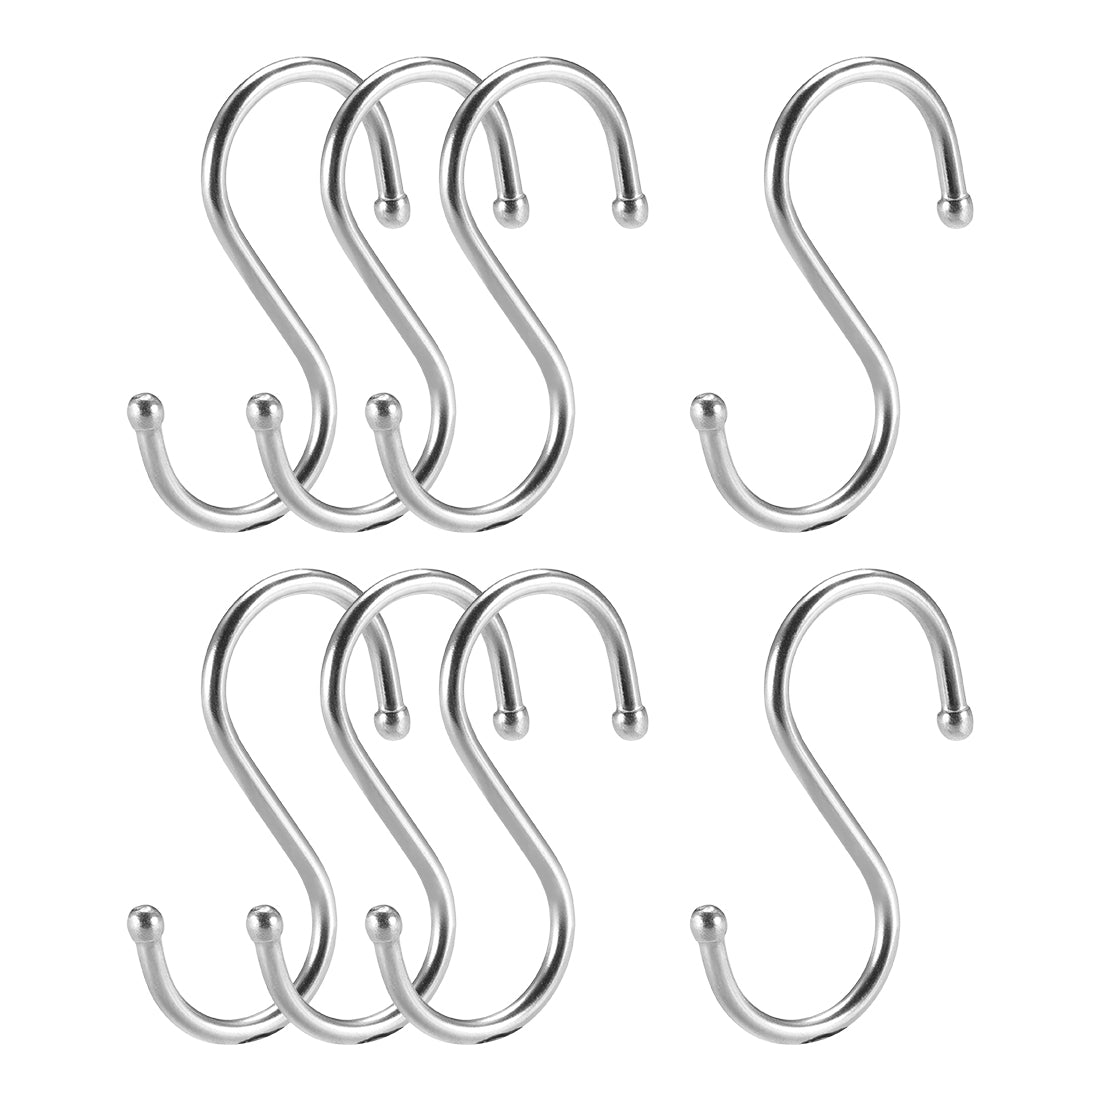 uxcell Uxcell Stainless Steel S Hooks 2" S Shaped Hook Hangers 8pcs